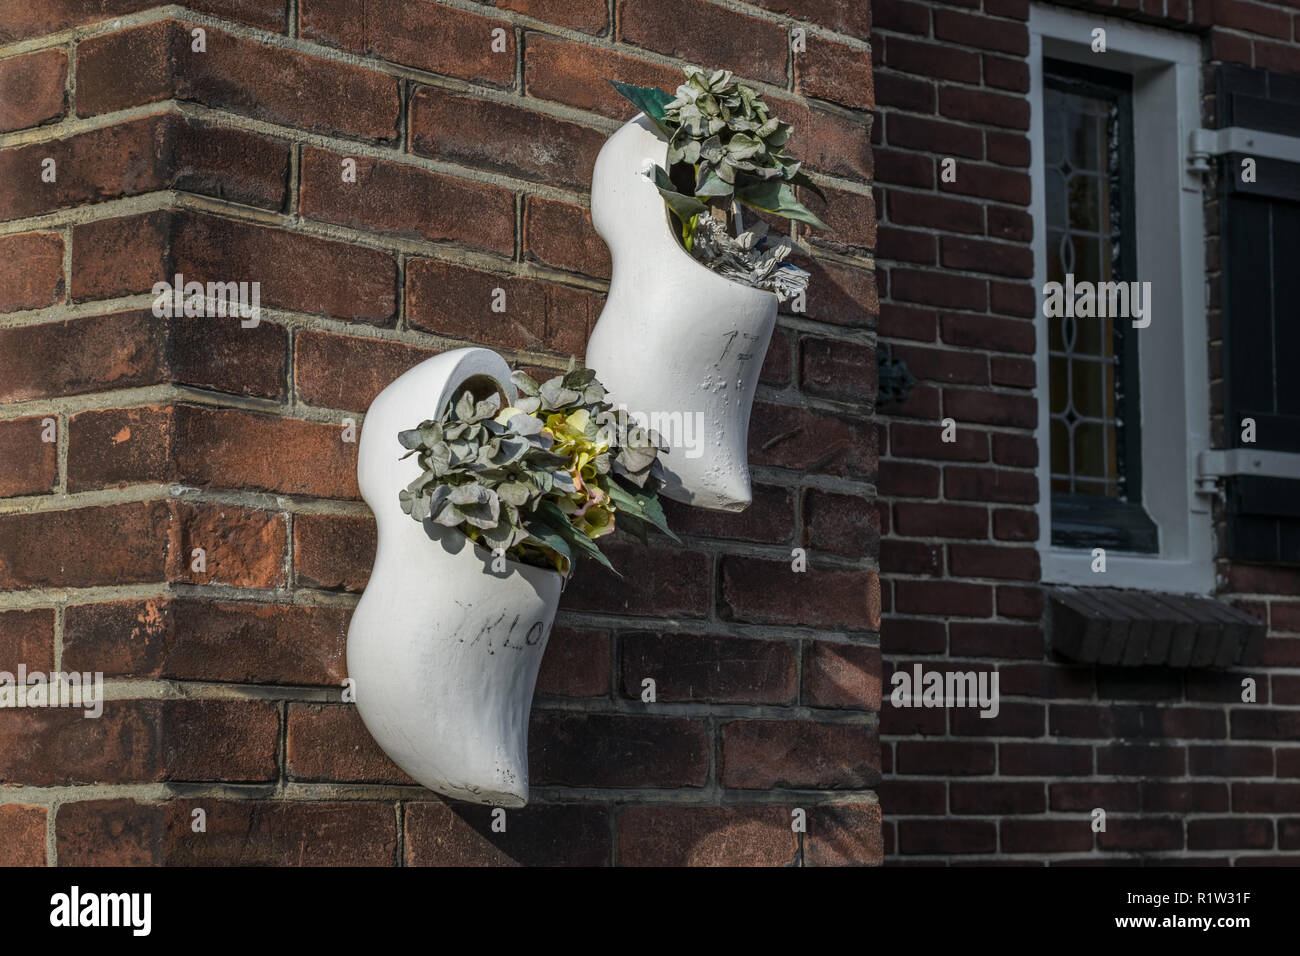 Plants in typical dutch wooden shoes on a brick wall Stock Photo